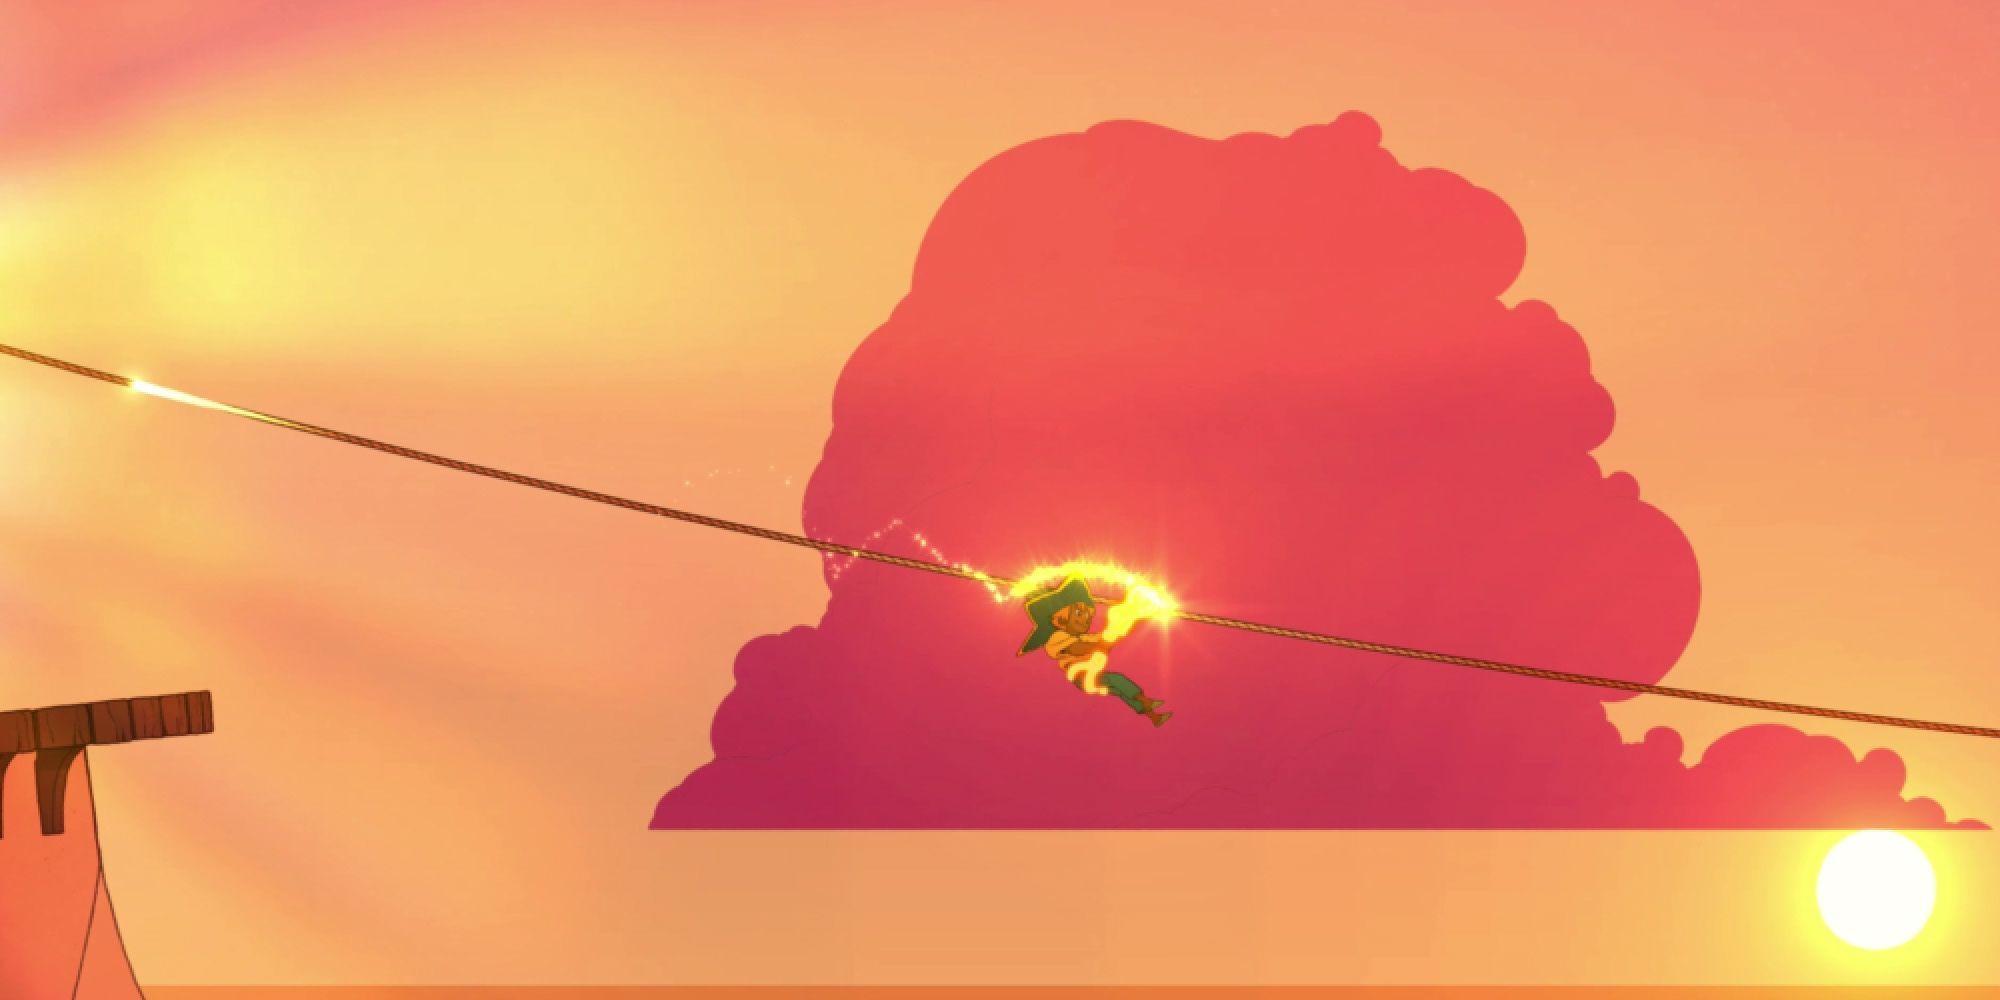 Stella rides a zipline across the screen against a red cloud